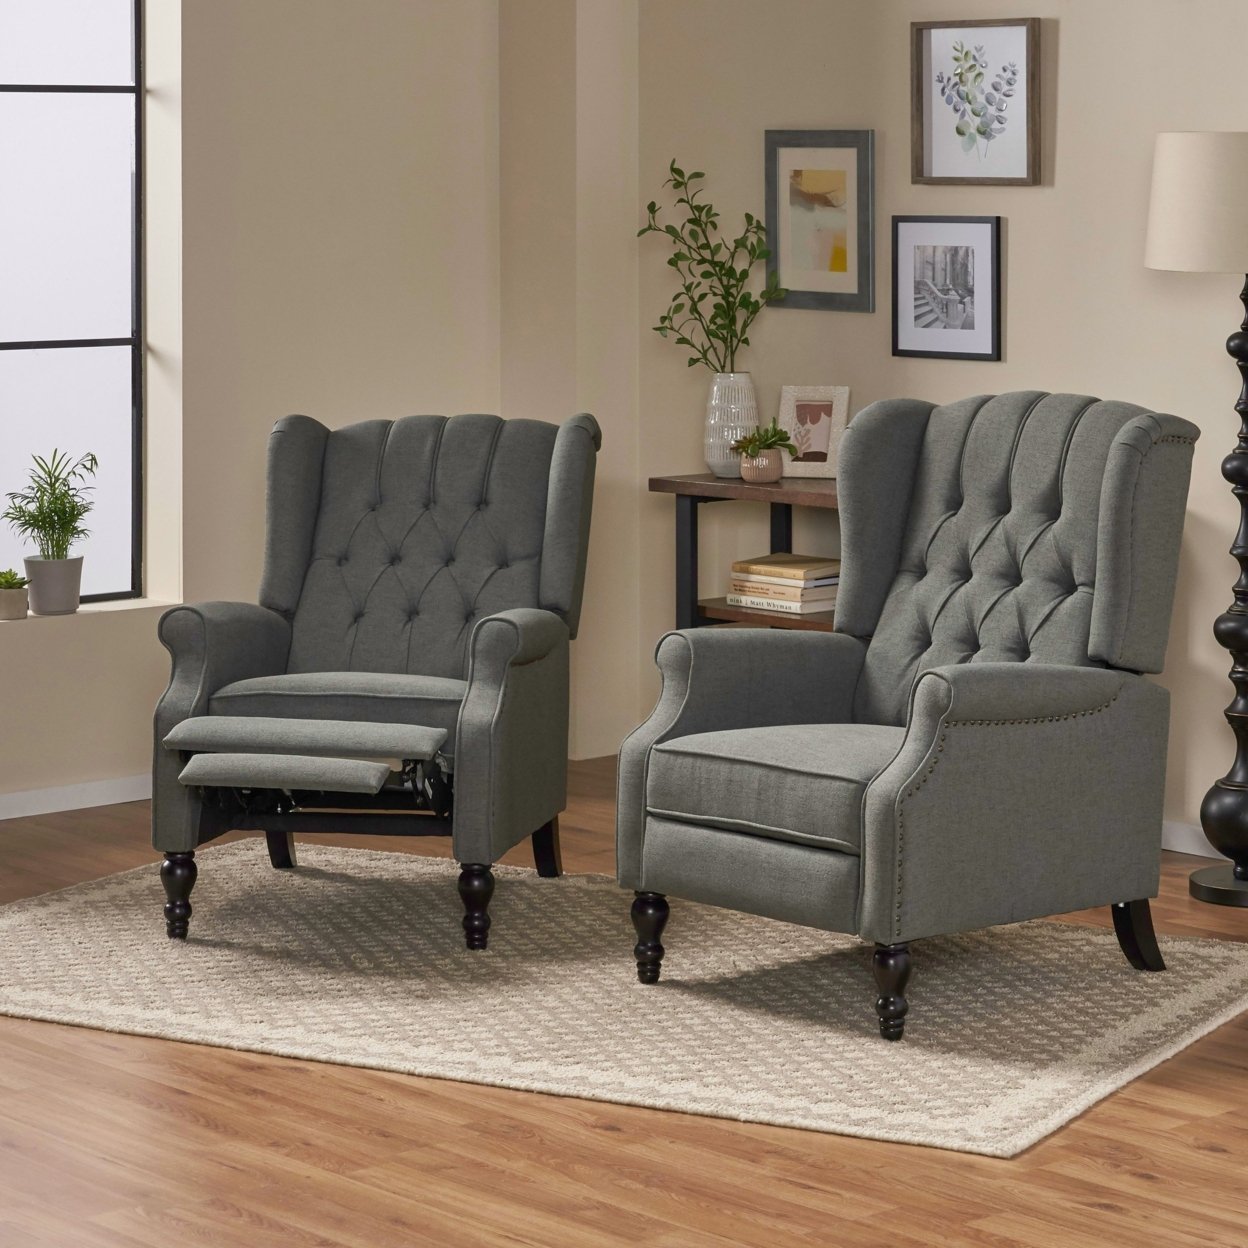 Elizabeth Contemporary Tufted Fabric Recliner (Set Of 2) - Charcoal